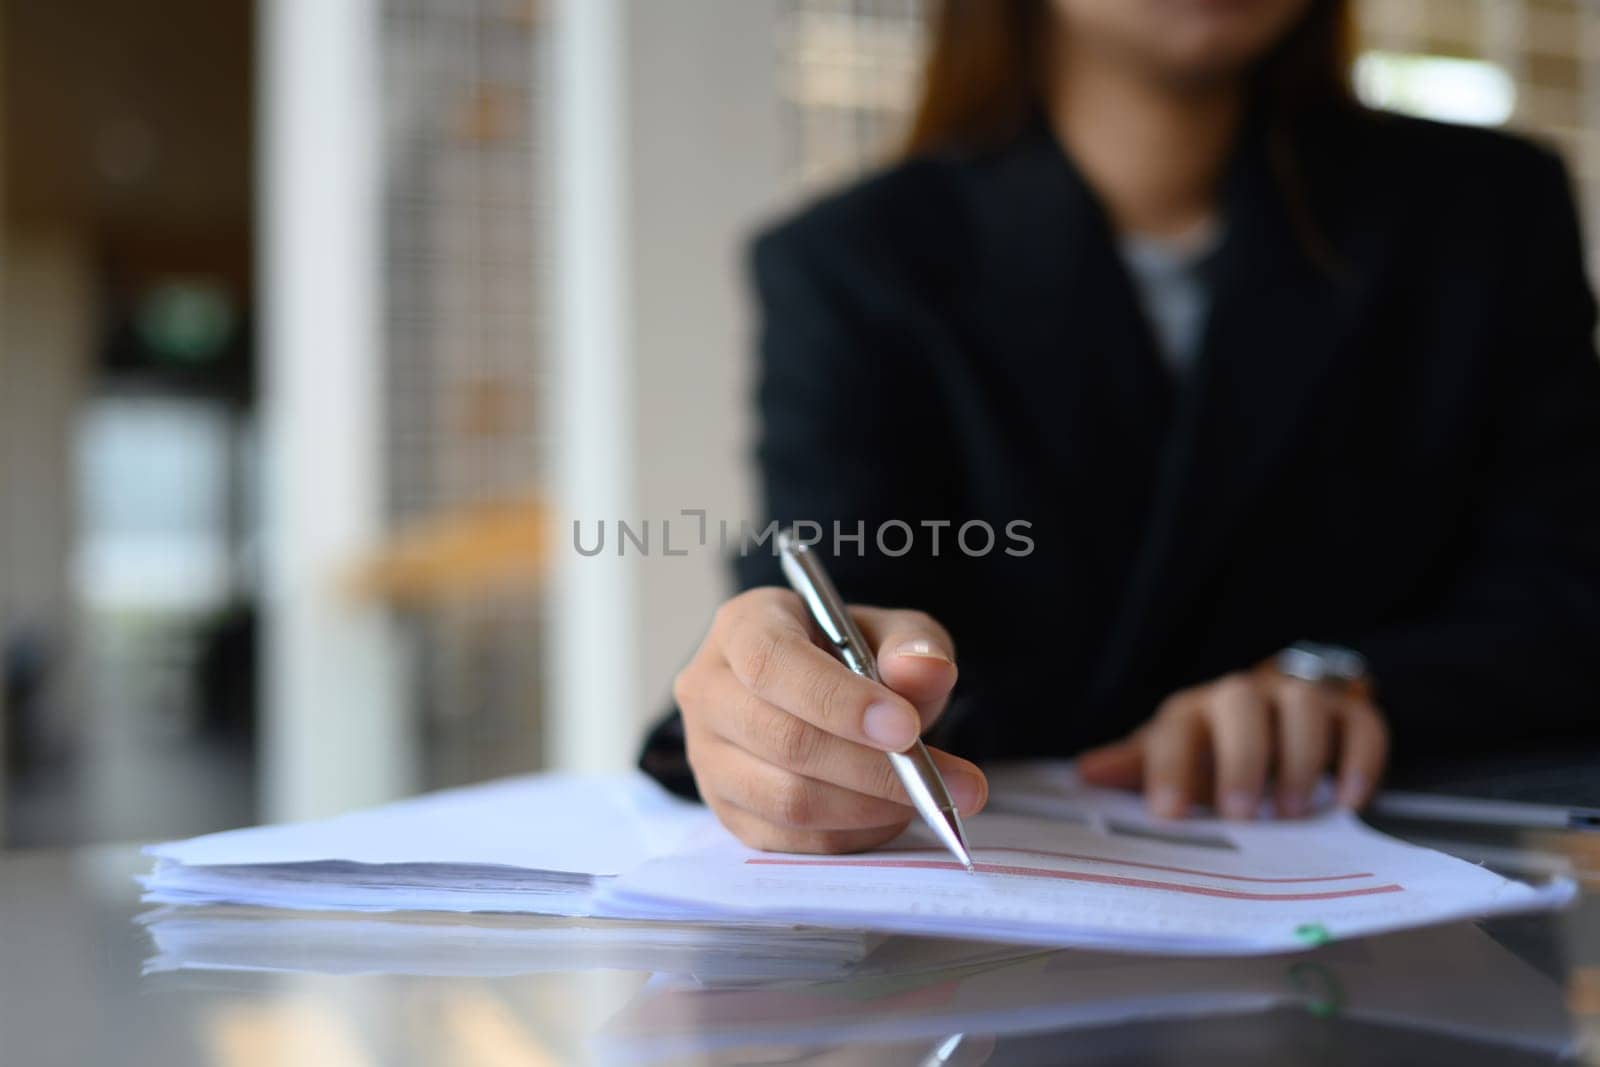 Focused on businesswoman hand writing on paper, filling paper business document at office desk by prathanchorruangsak